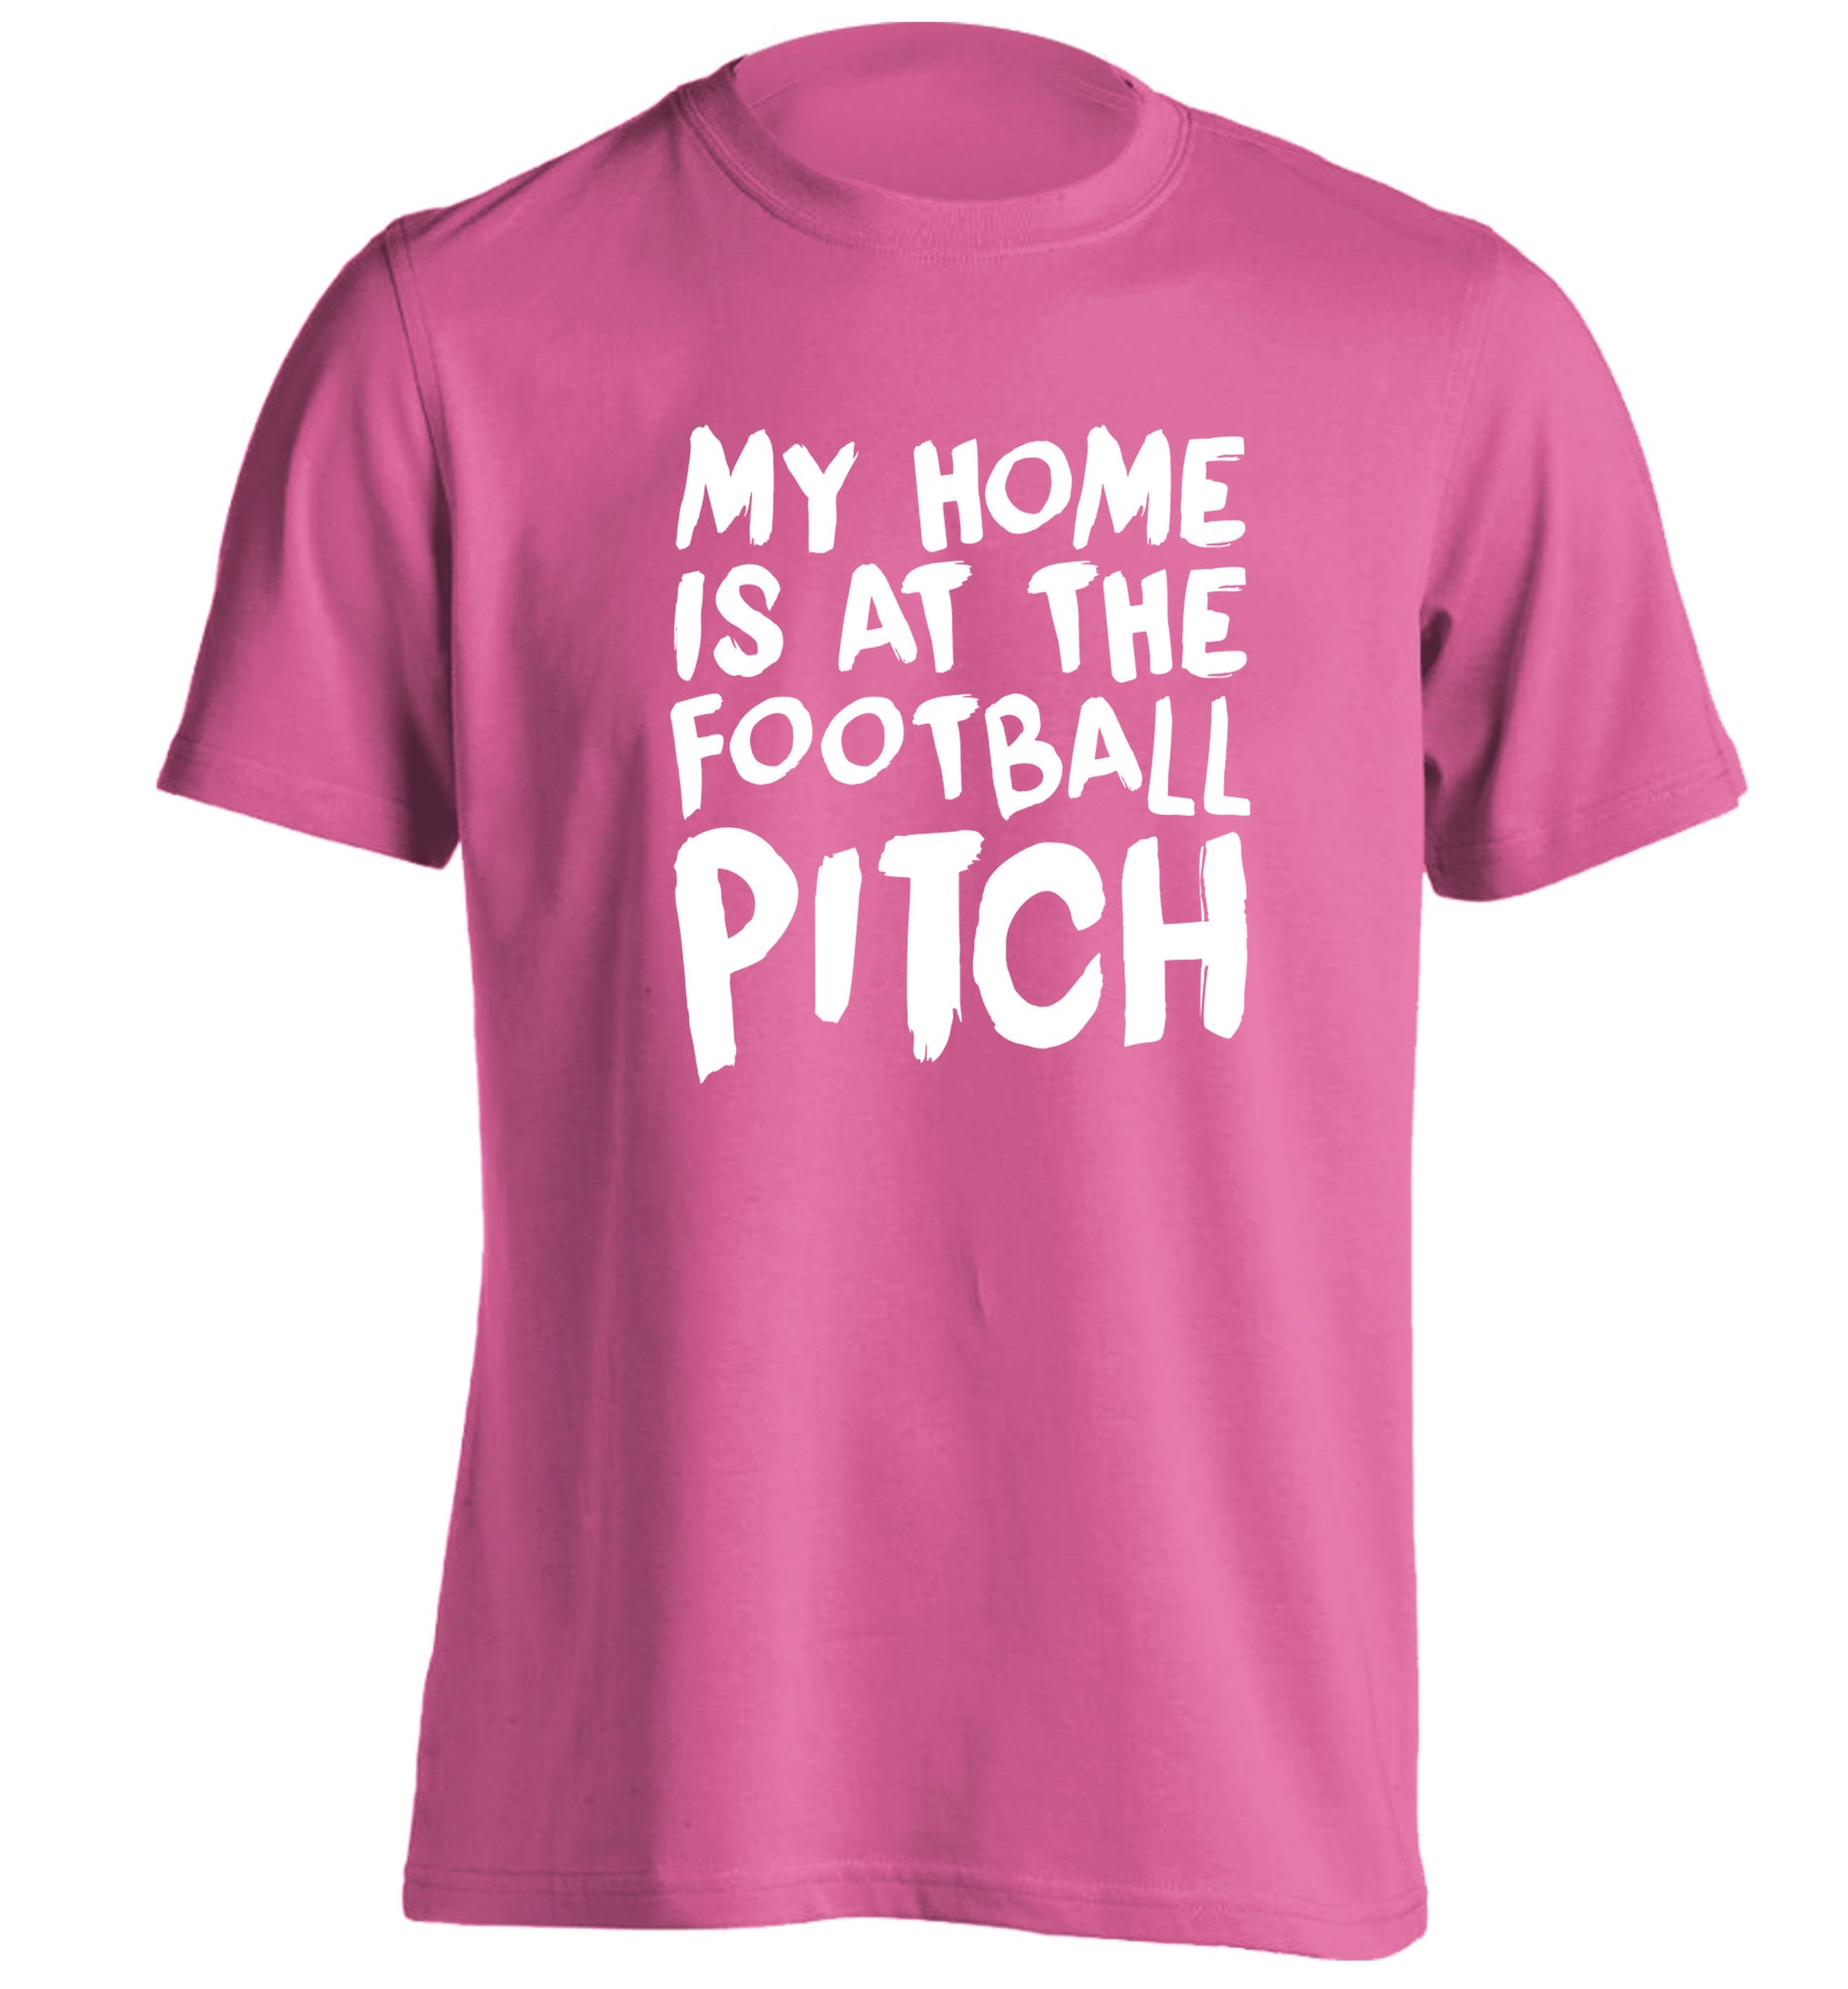 My home is at the football pitch adults unisex pink Tshirt 2XL